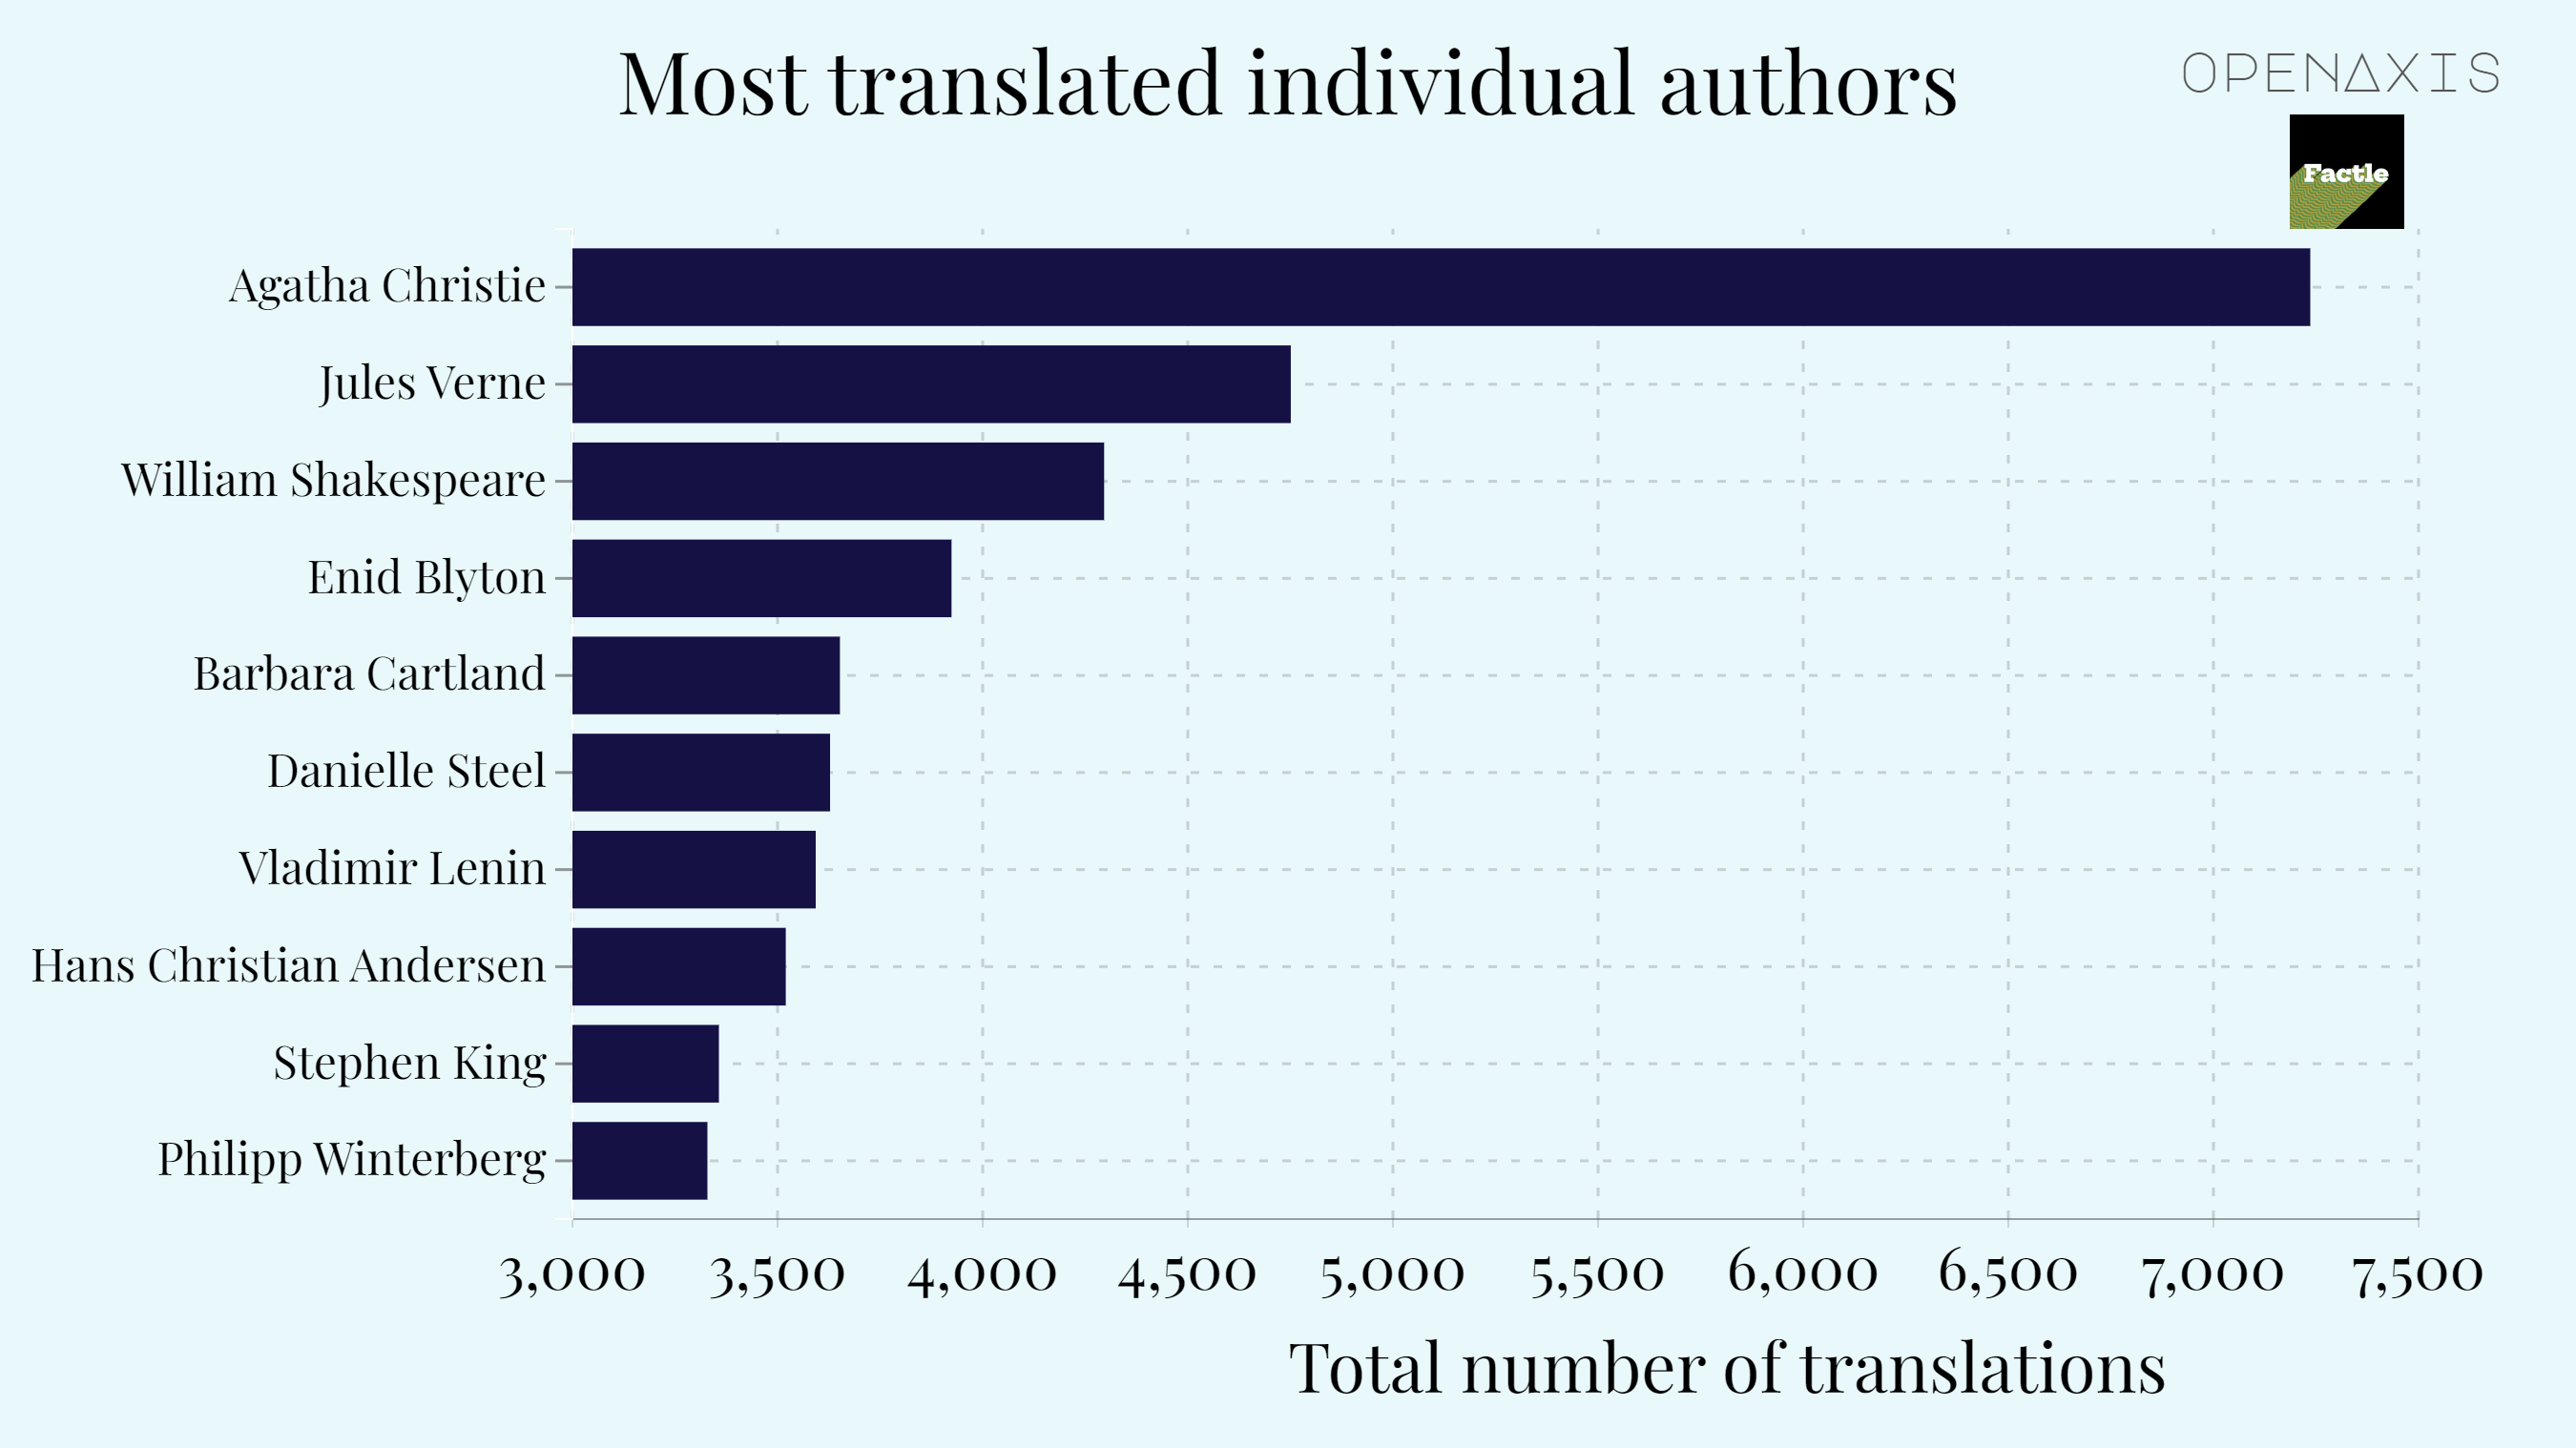 "Most translated individual authors"